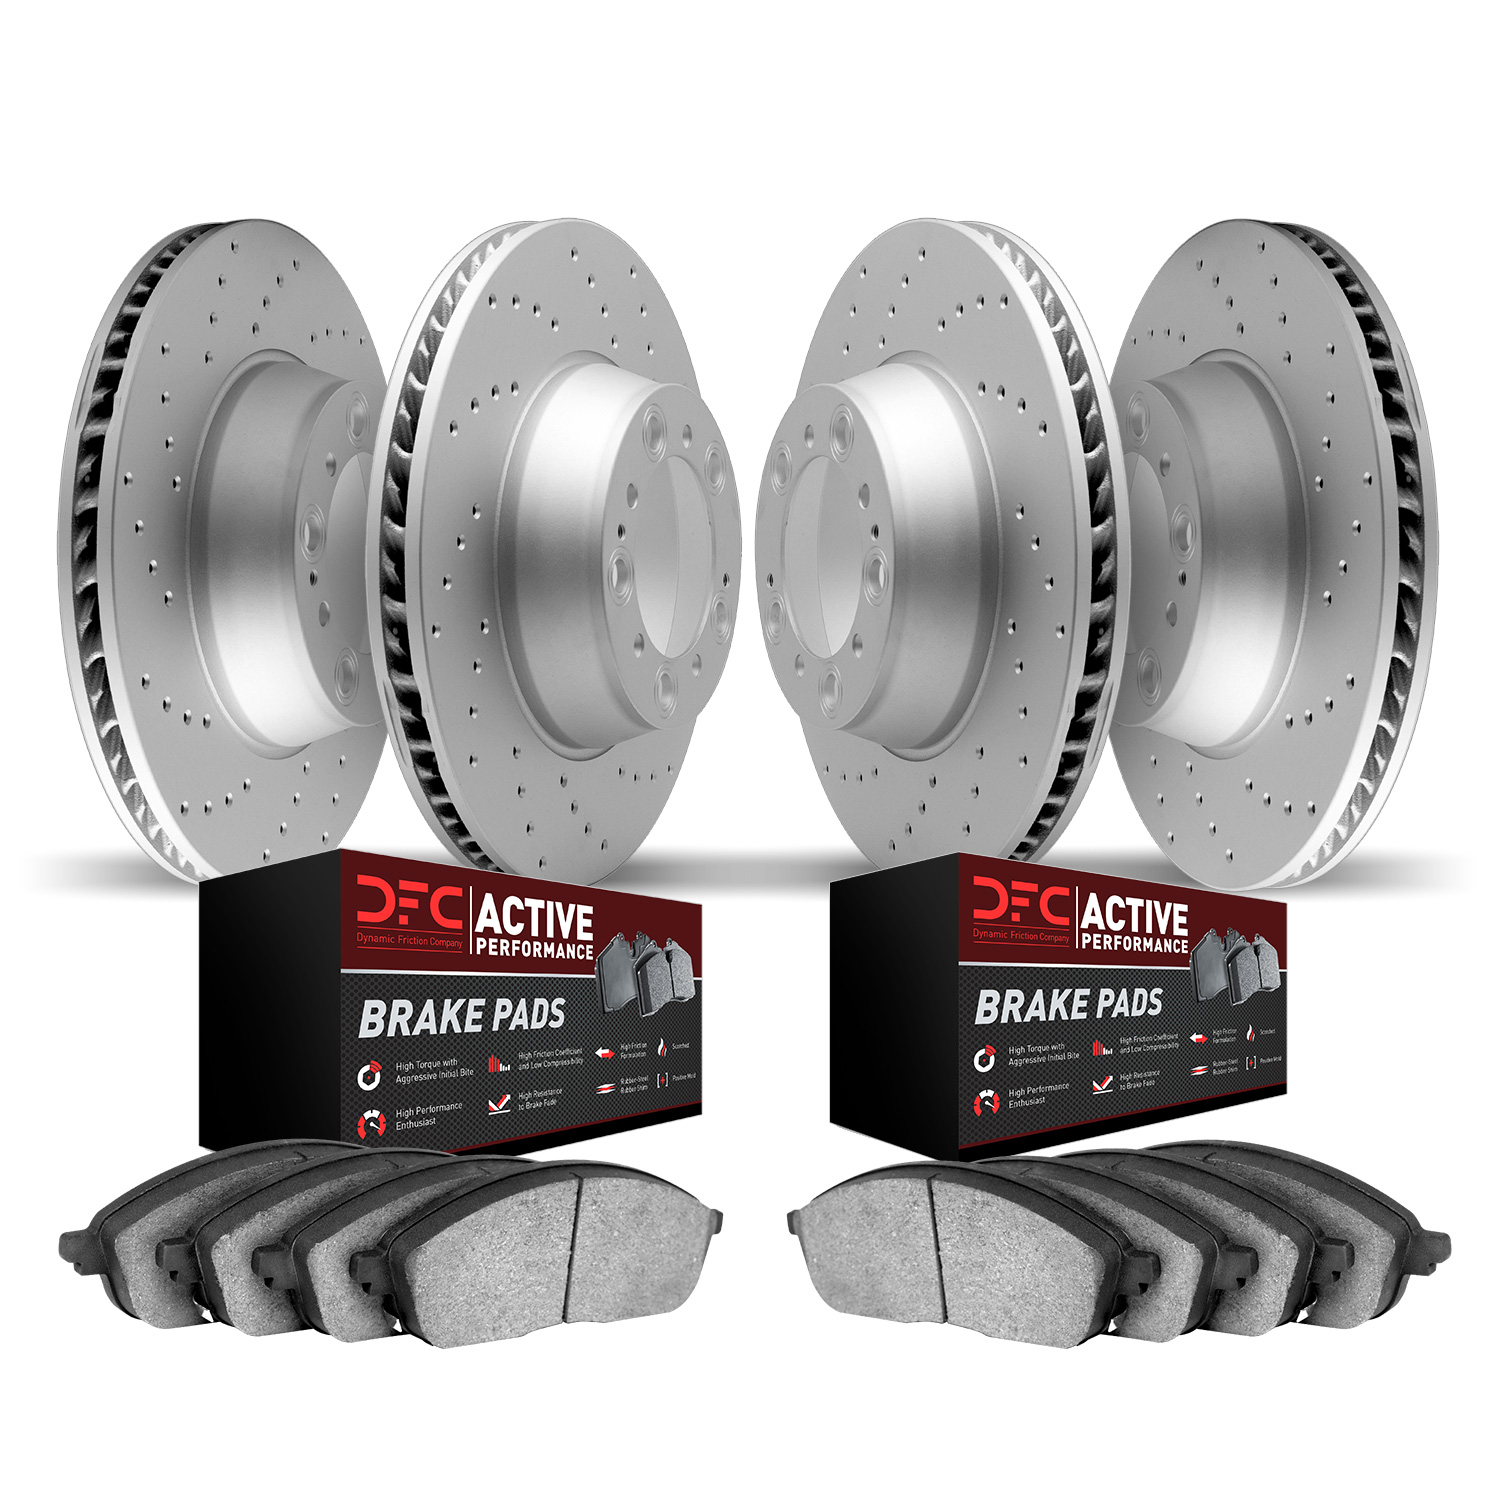 2704-75008 Geoperformance Drilled Brake Rotors with Active Performance Pads Kit, 2009-2011 Lexus/Toyota/Scion, Position: Front a